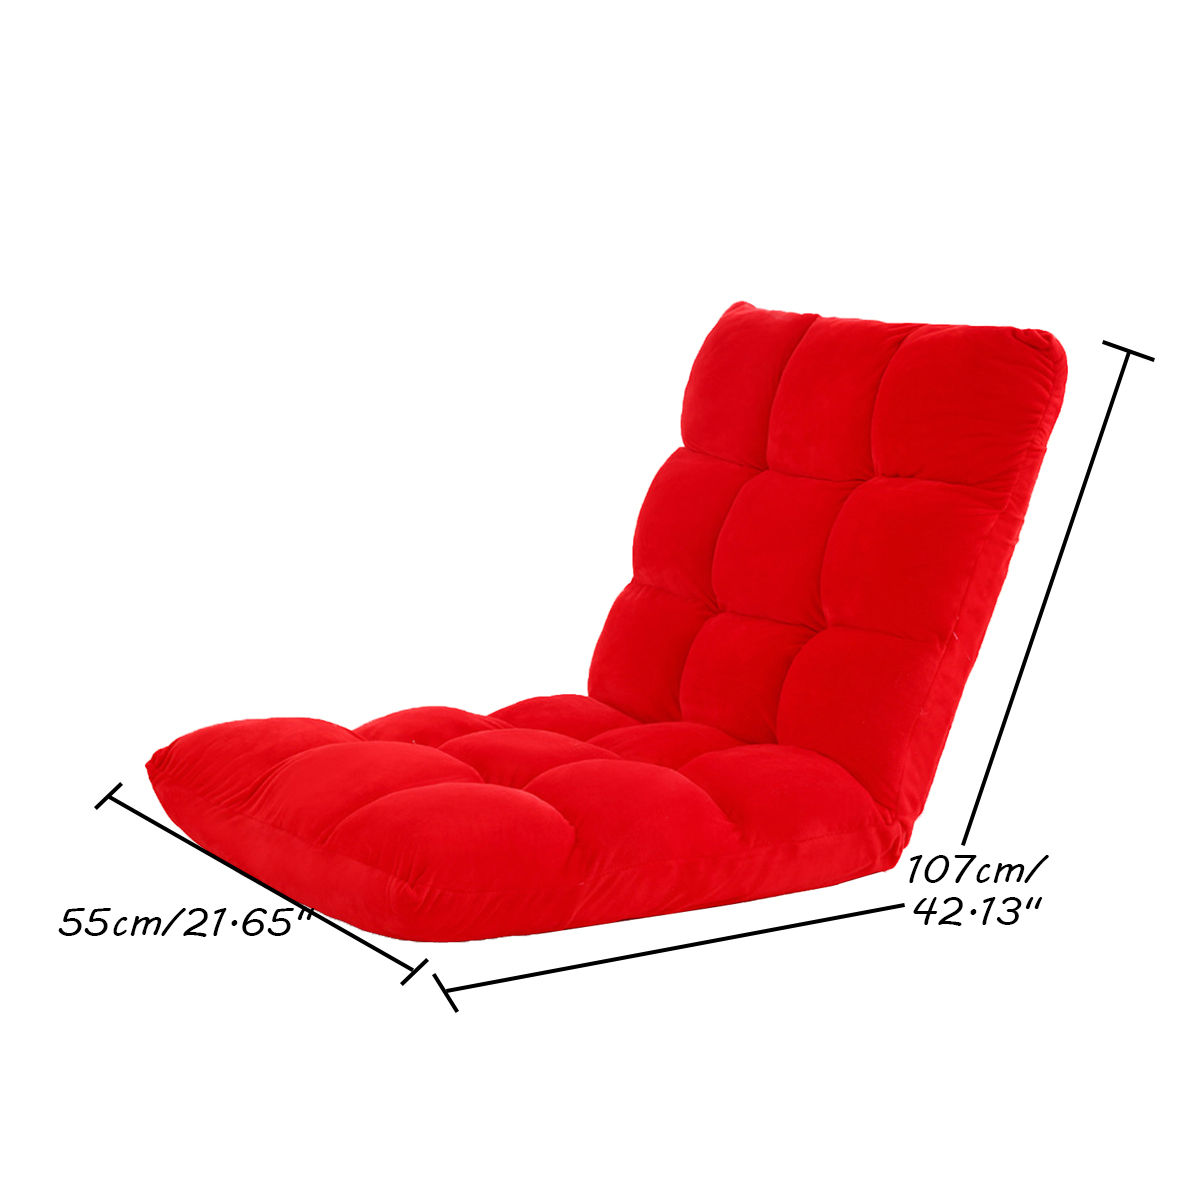 Adjustable Lazy Sofa Cushioned Floor Lounge Chair Living Room Leisure Chaise Chair 58